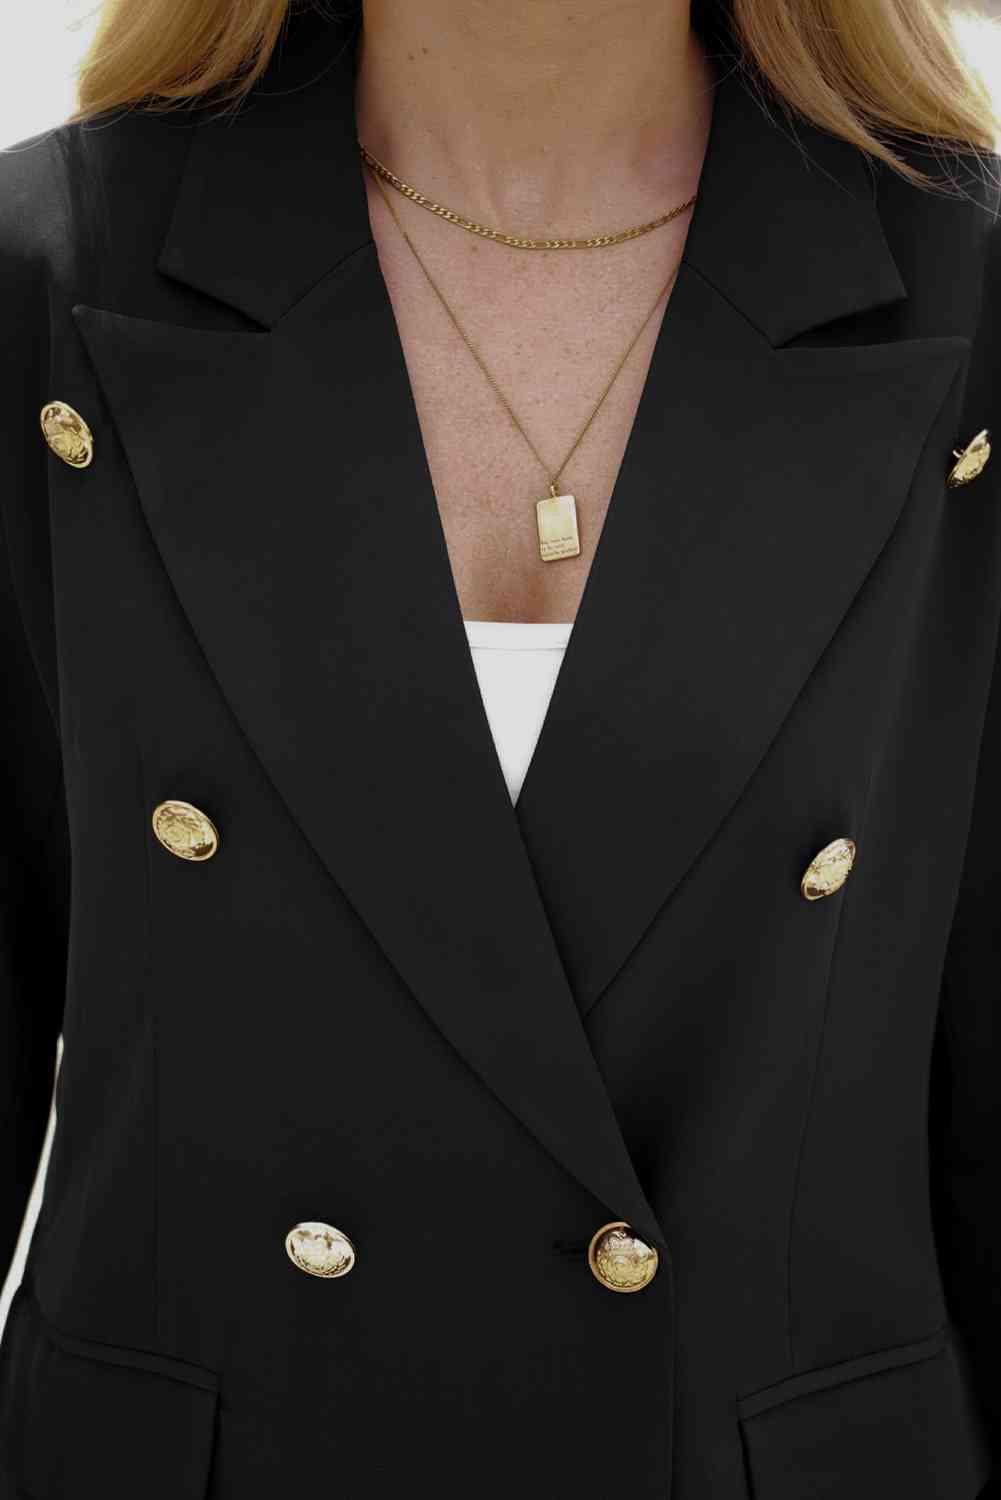 a woman wearing a black jacket with gold buttons